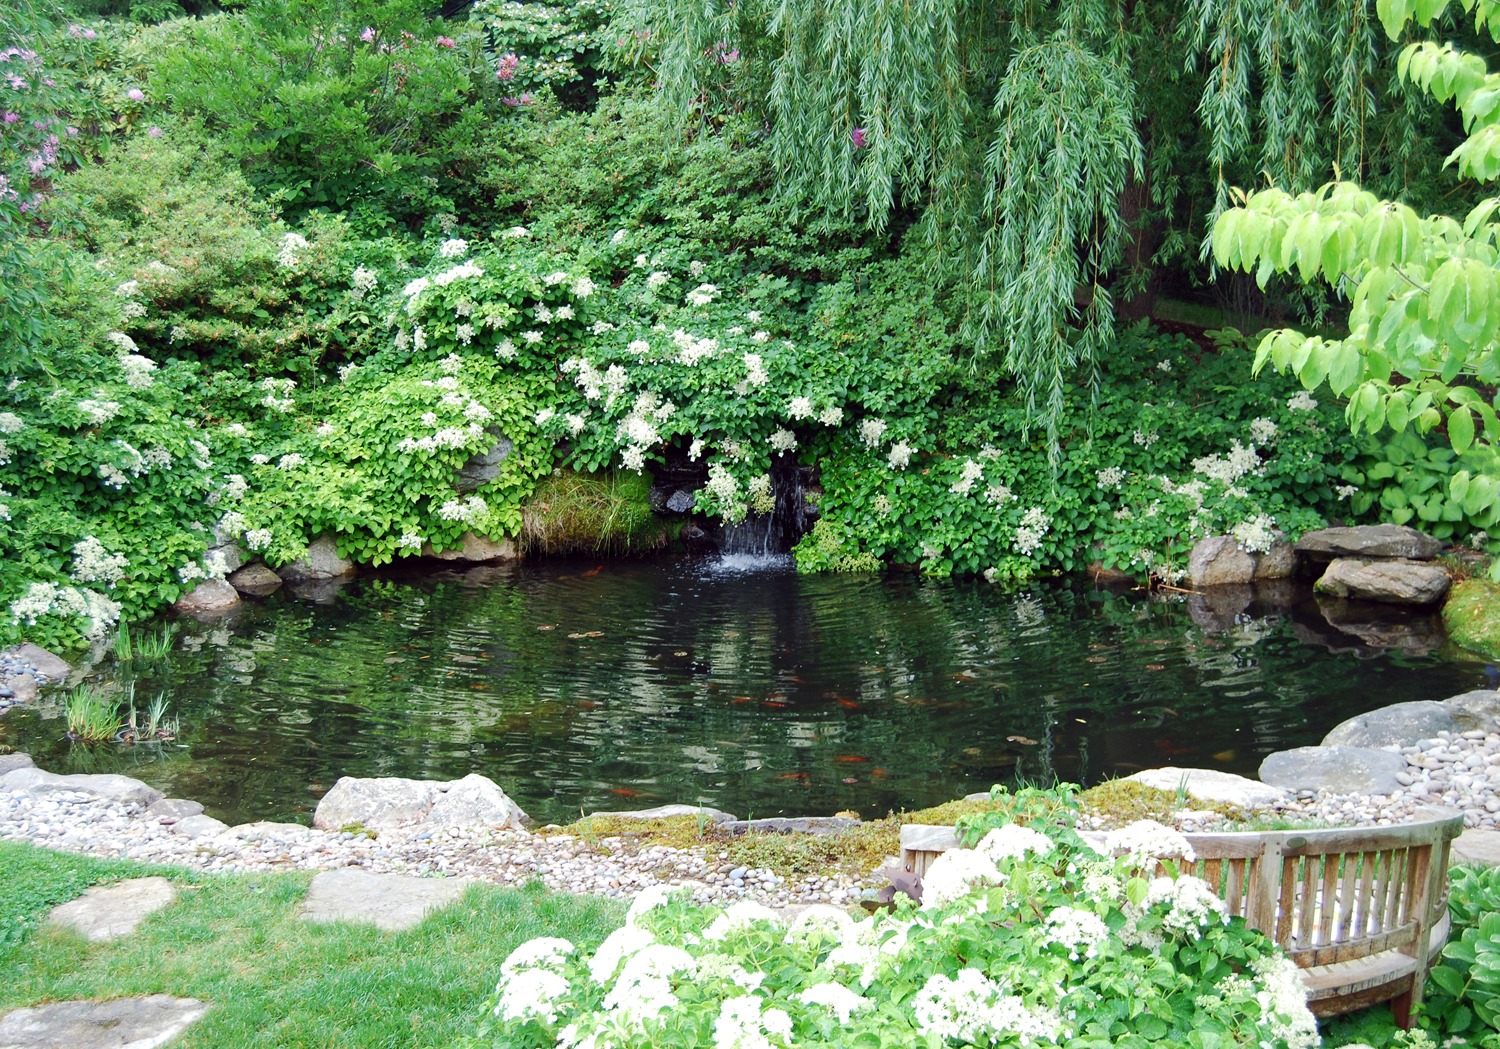 A serene garden pond surrounded by lush vegetation, with a small waterfall, flowering shrubs, a wooden bench, and stones along the water's edge.